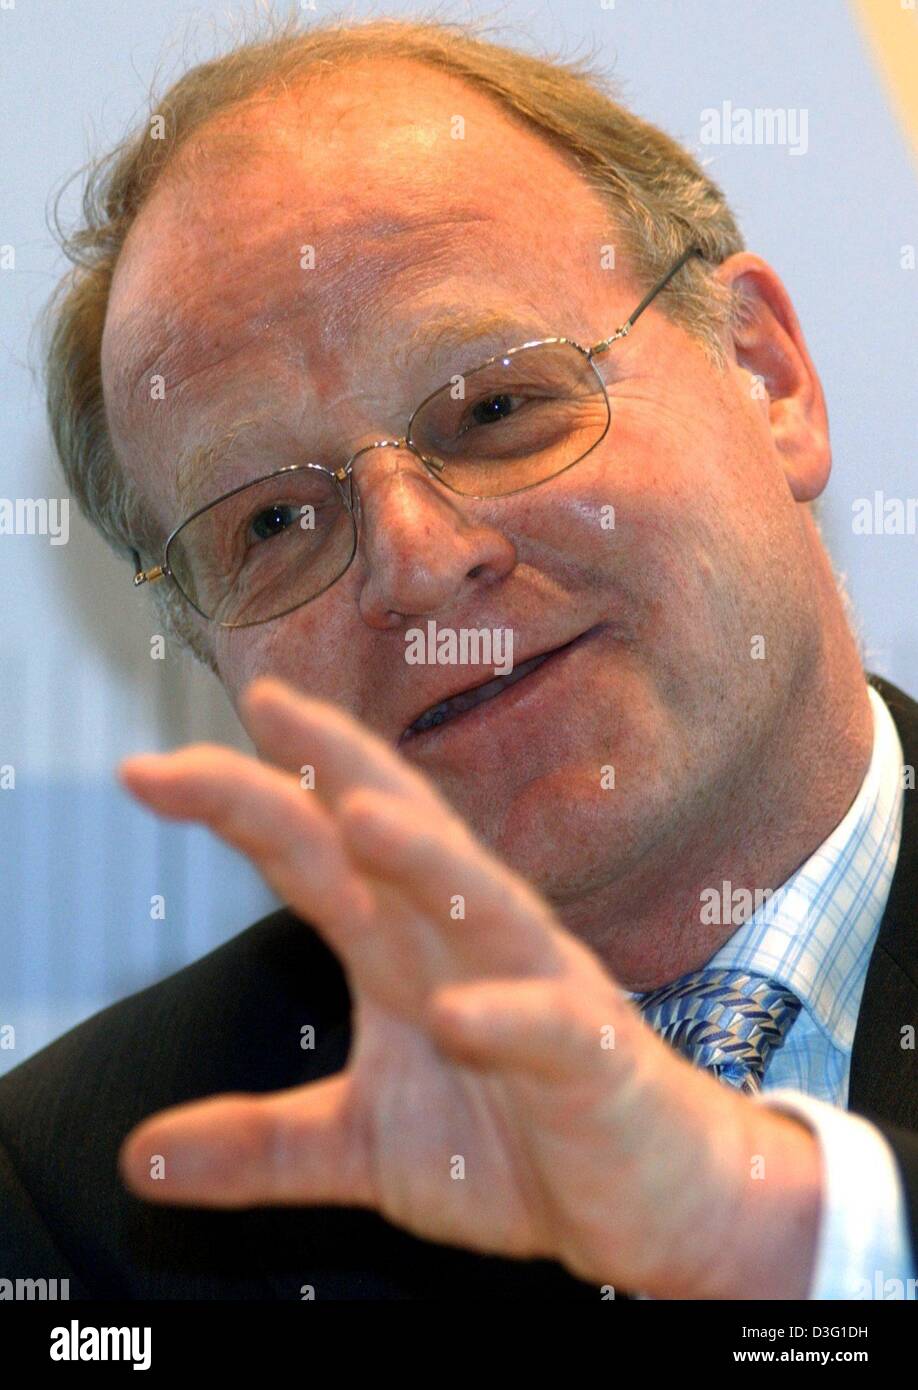 (dpa) - Ernst Welteke, President of the Bundesbank (German central bank), pictured at the presentation of the annual report in Frankfurt, 26 March 2003. 'If the geopolitical situation remains as it is now, a rate cut does not seem advisable', Welteke said. He is also a member of the ECB board of governors which will meet in Rome on 3 April and study the effects of the Iraq war on t Stock Photo